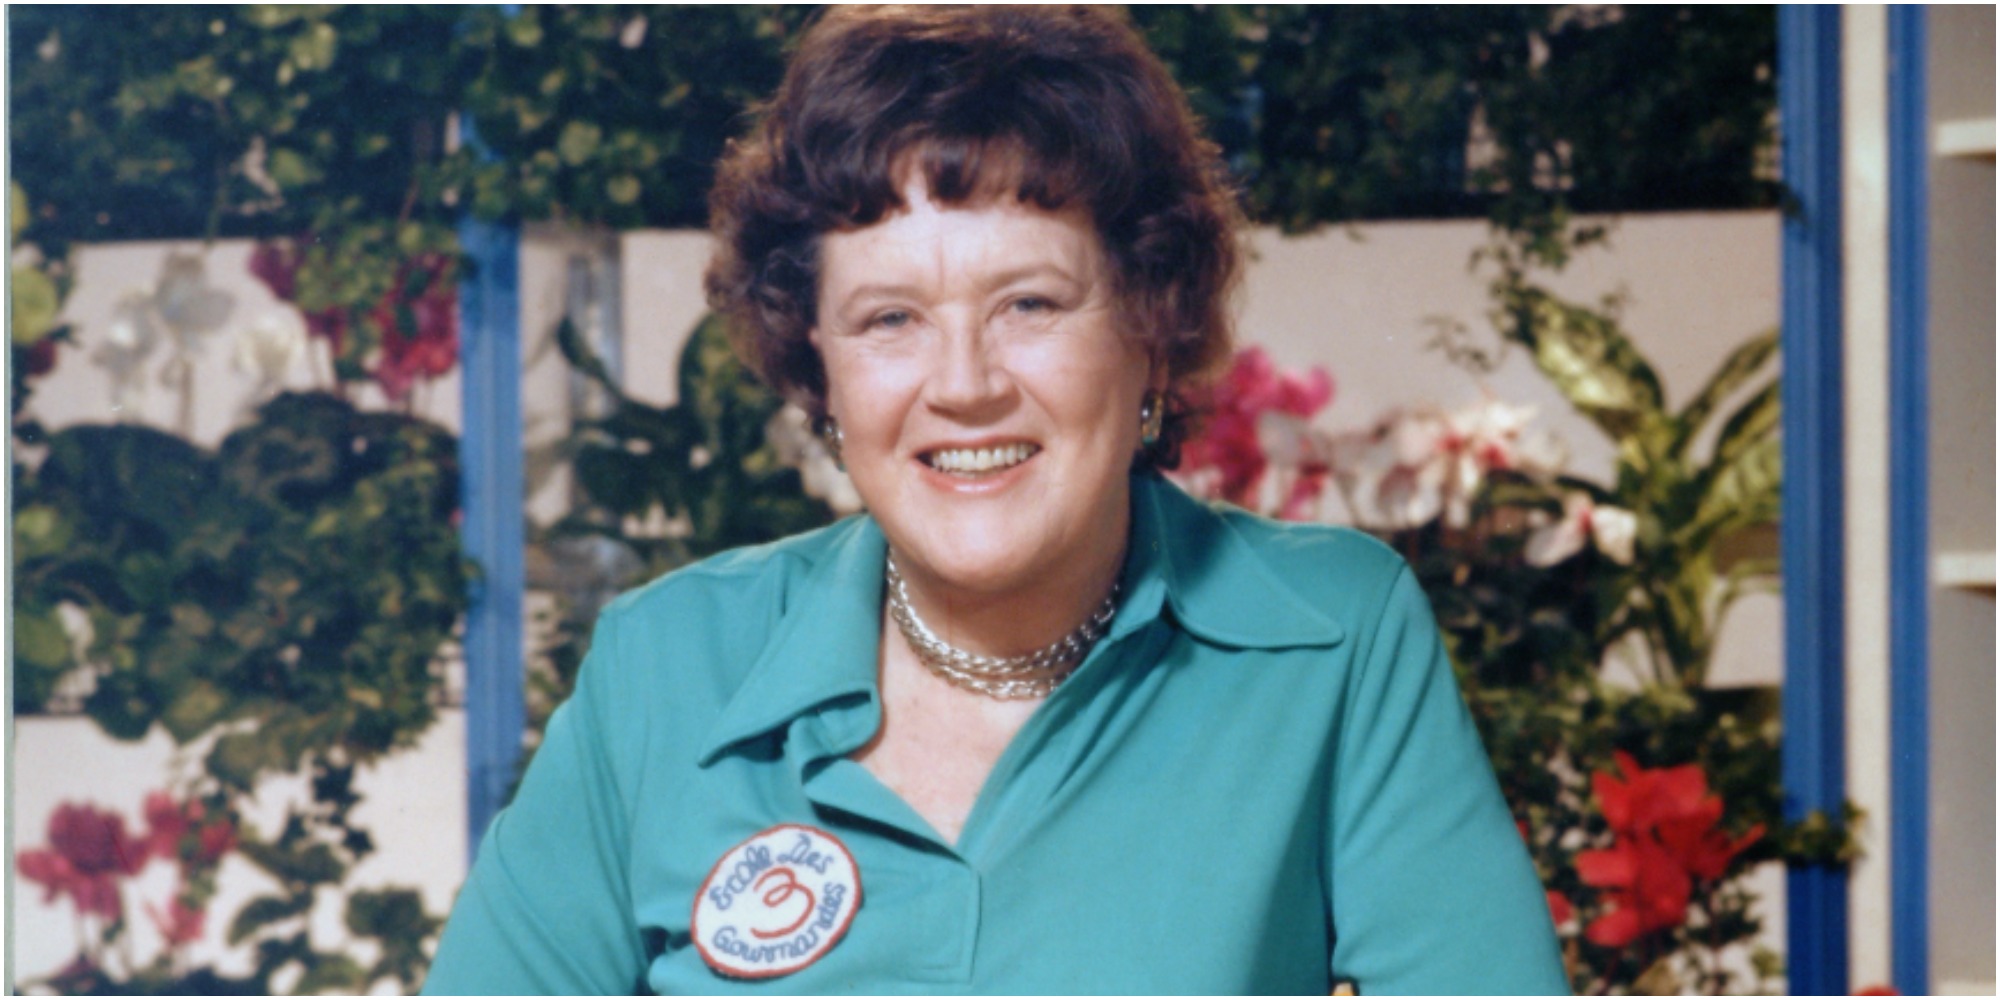 Julia Child photographed during a television appearance.